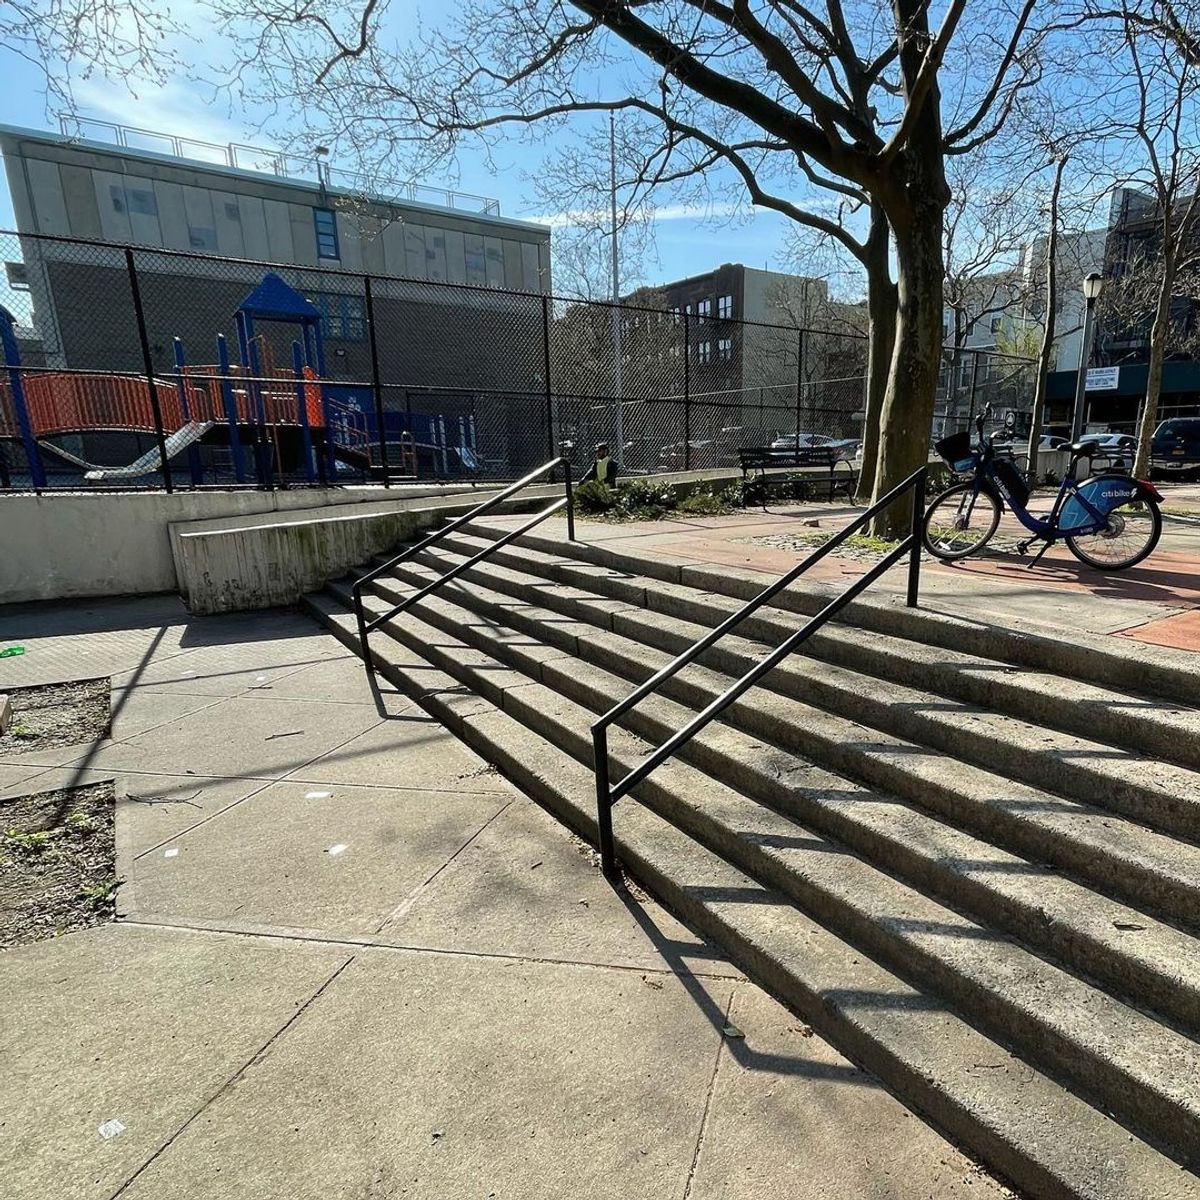 Image for skate spot Woods Playground - 7 Stair Rails